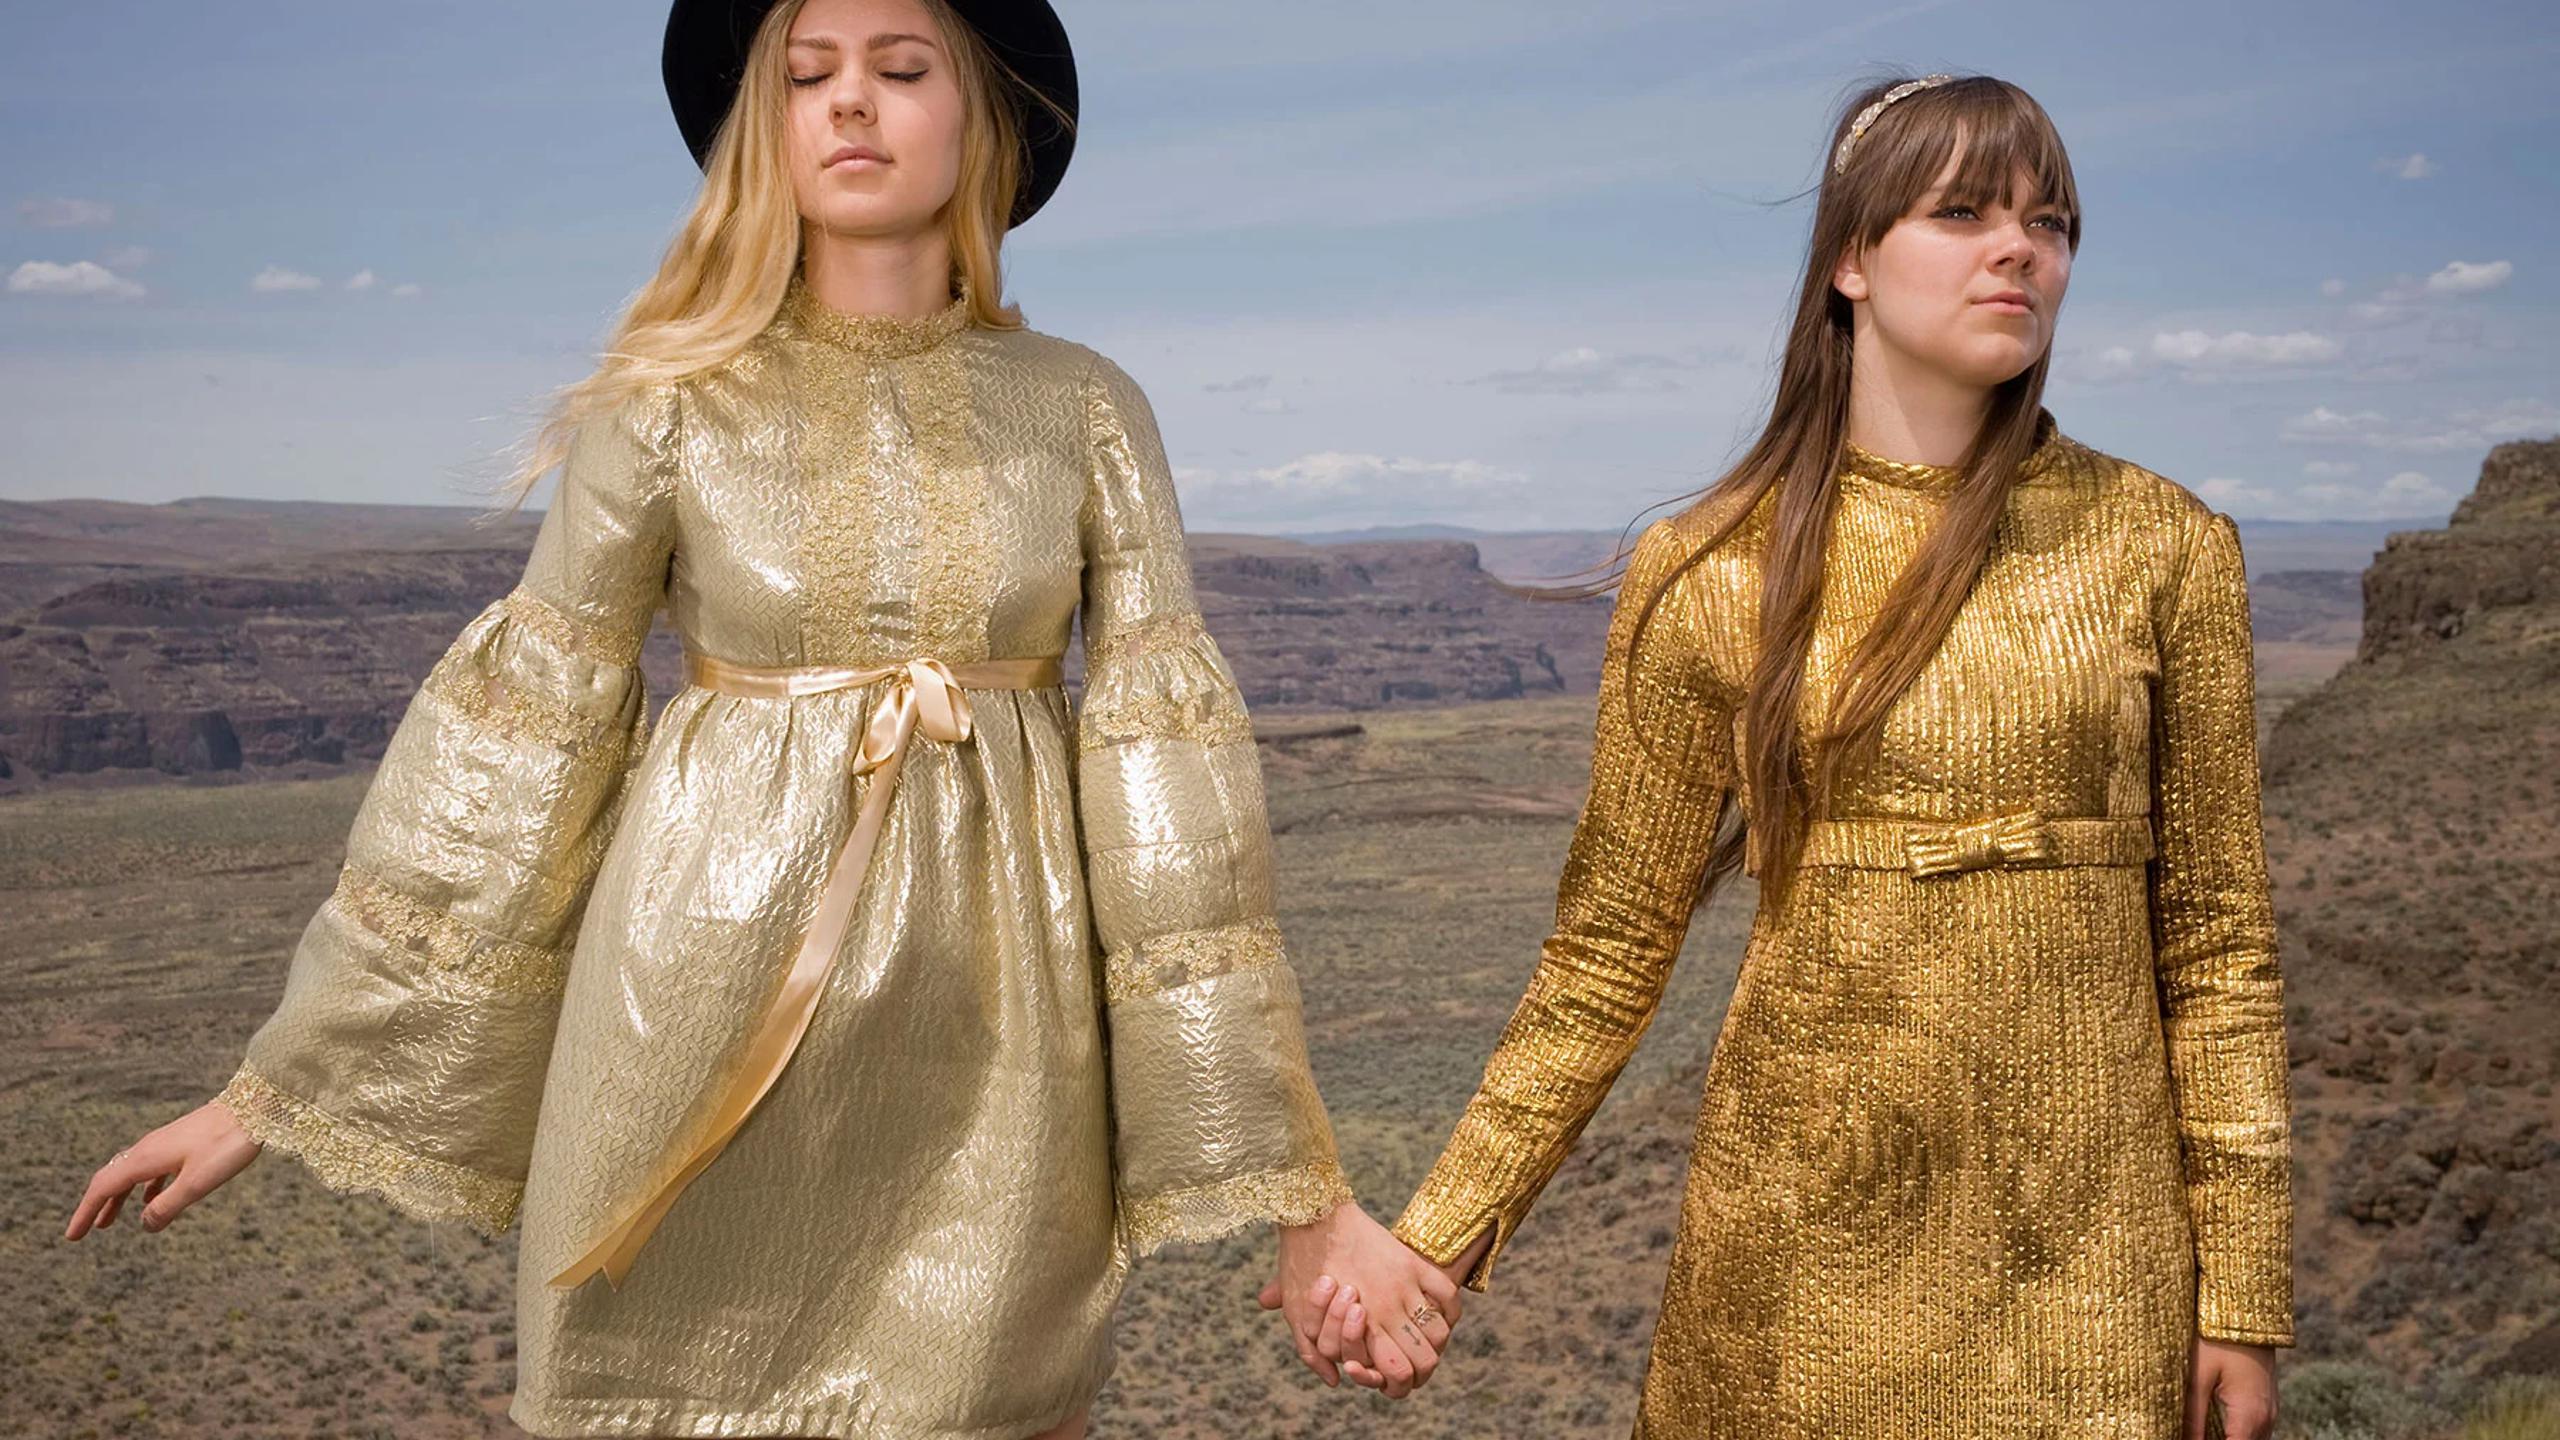 First Aid Kit tour dates 2022 2023. First Aid Kit tickets and concerts